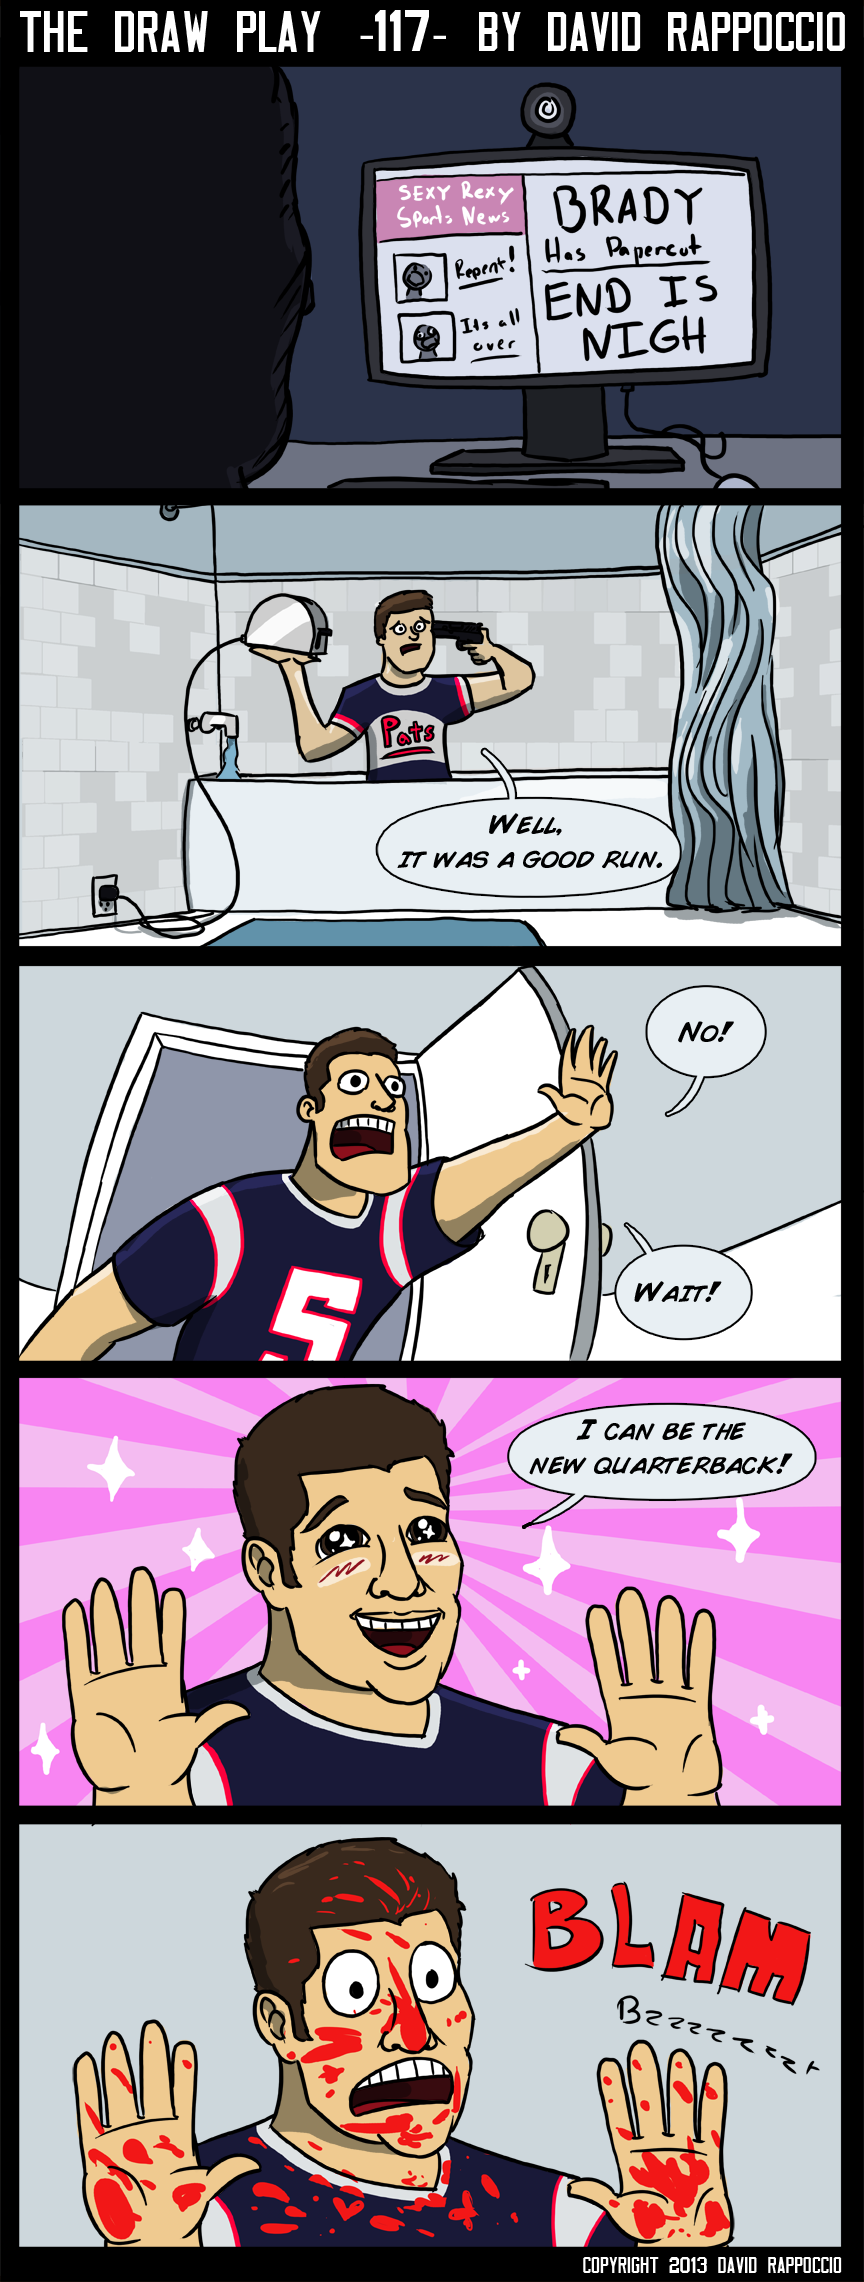 I'd kill myself too if Tim Tebow showed up in my bathroom acting all anime